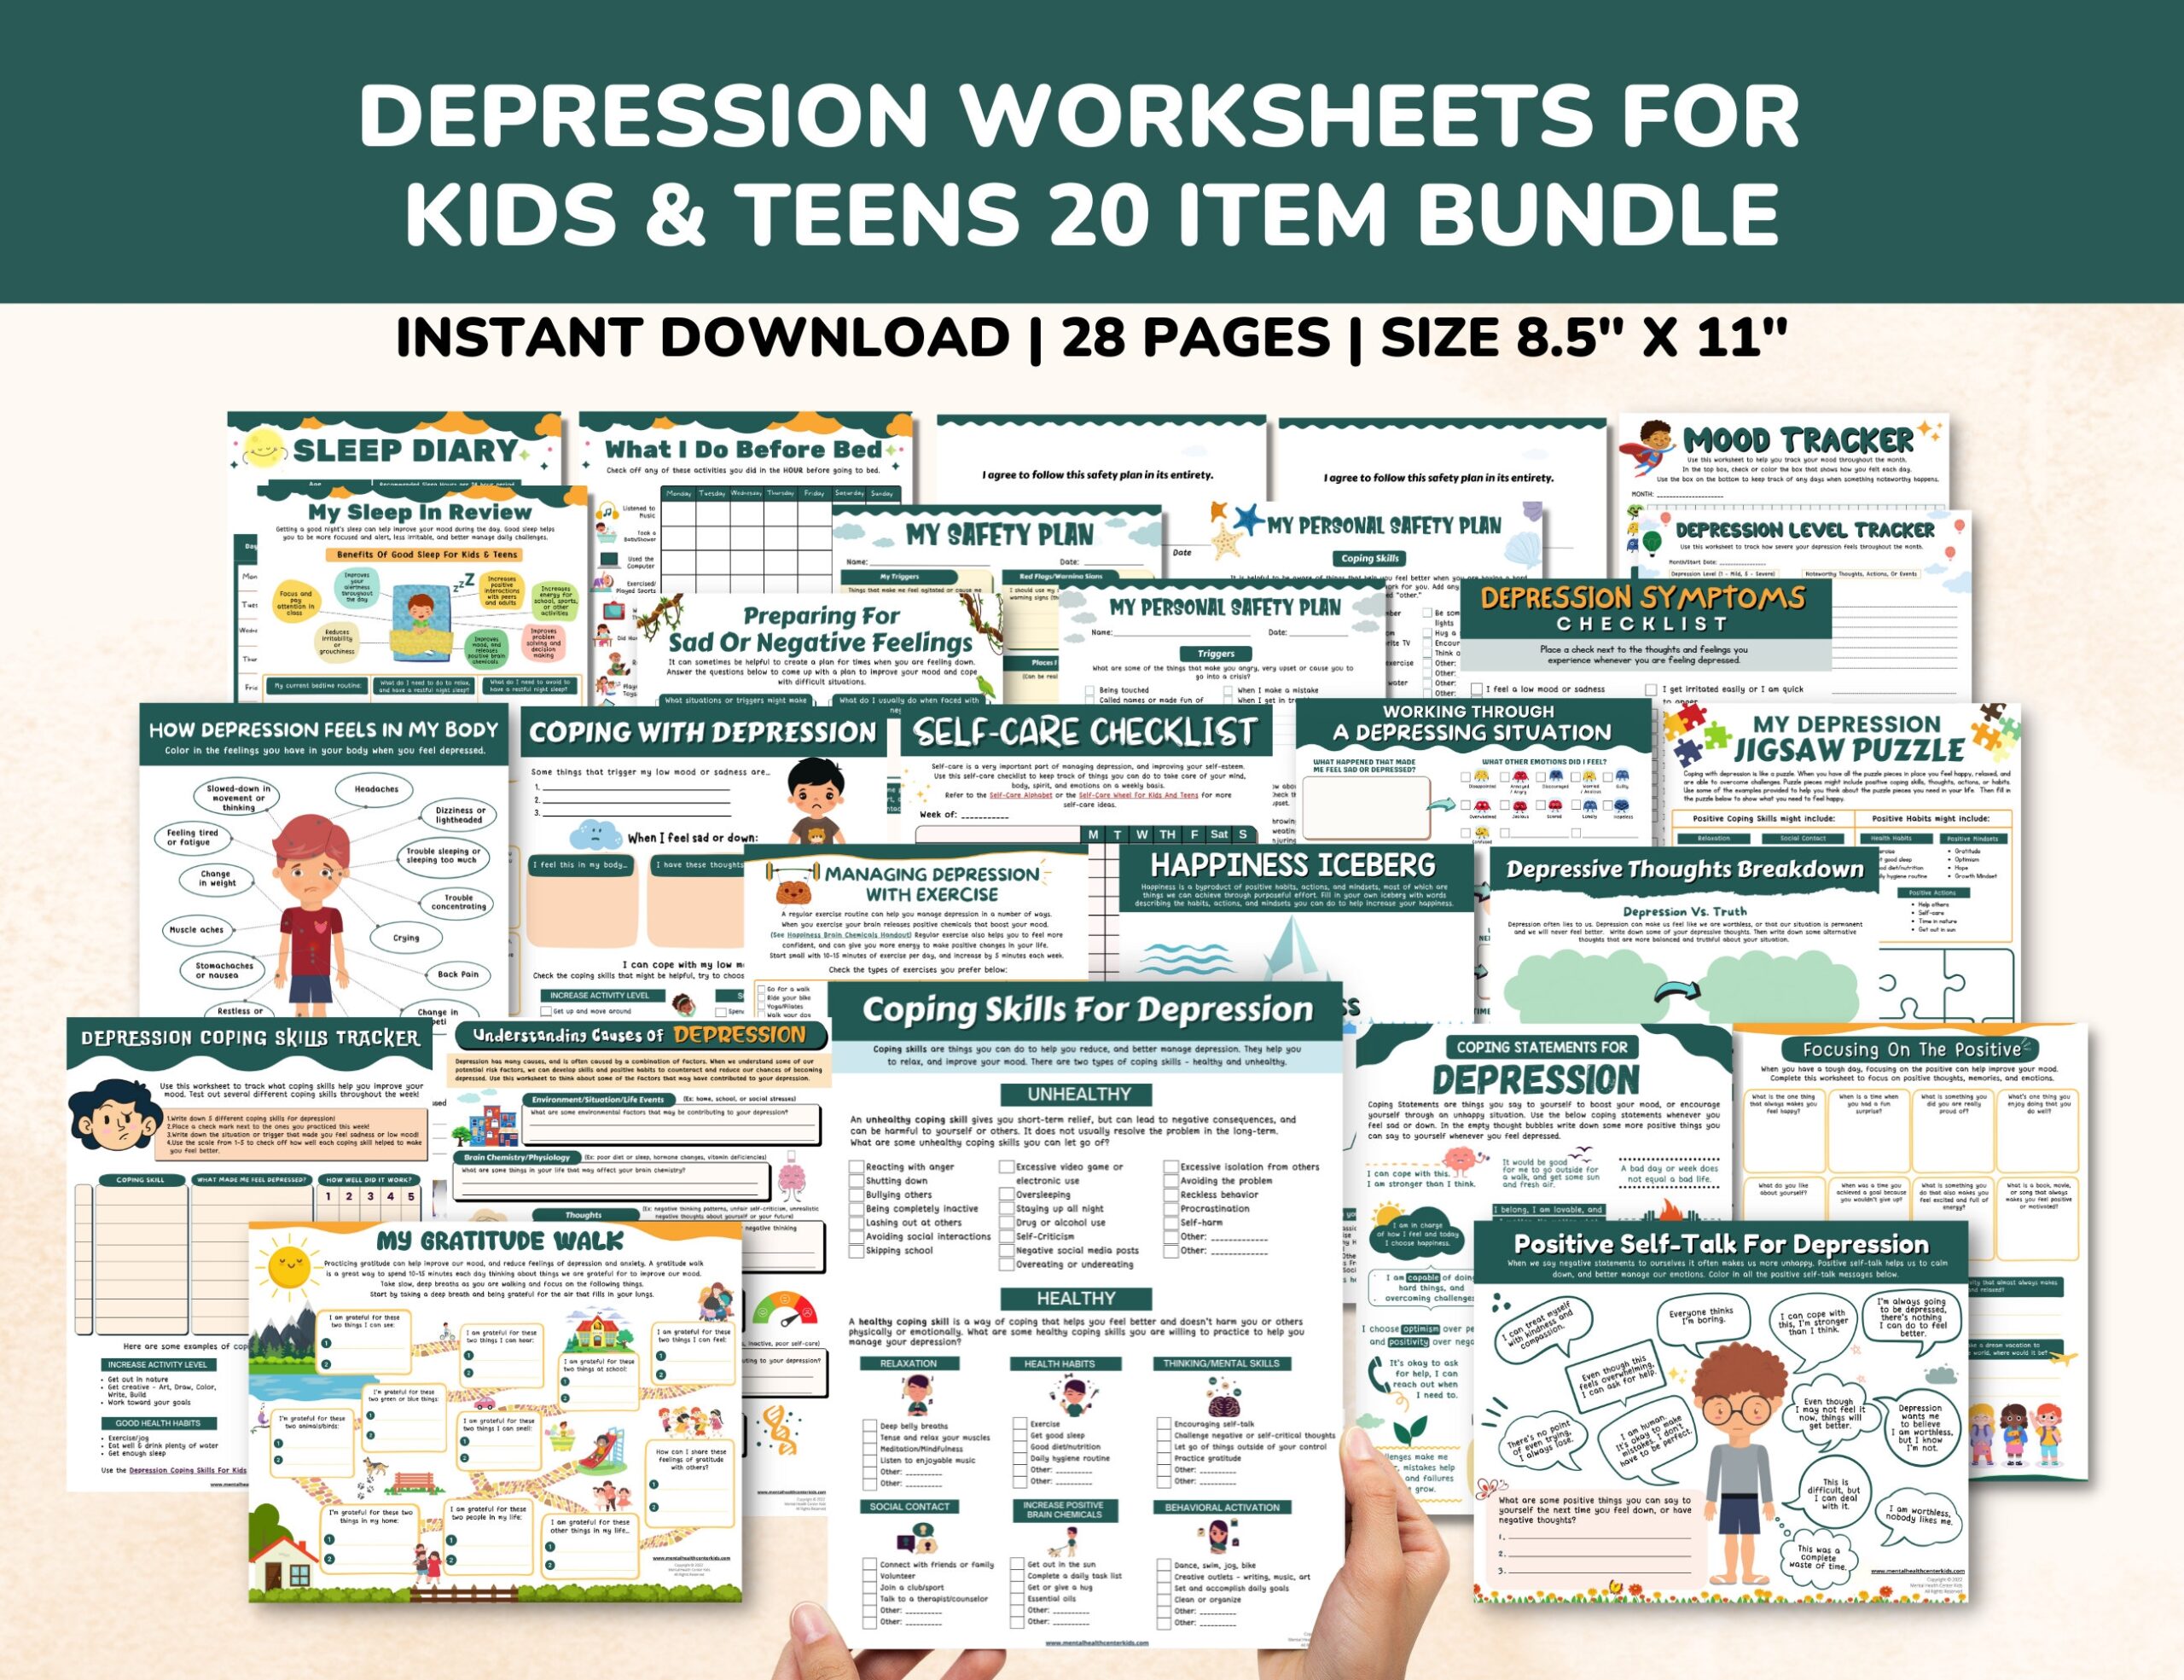 Depression Worksheets 20 Item Printable Mental Health Bundle For Kids Teens child Therapy Counseling Social Emotional Learning Relief CBT Etsy